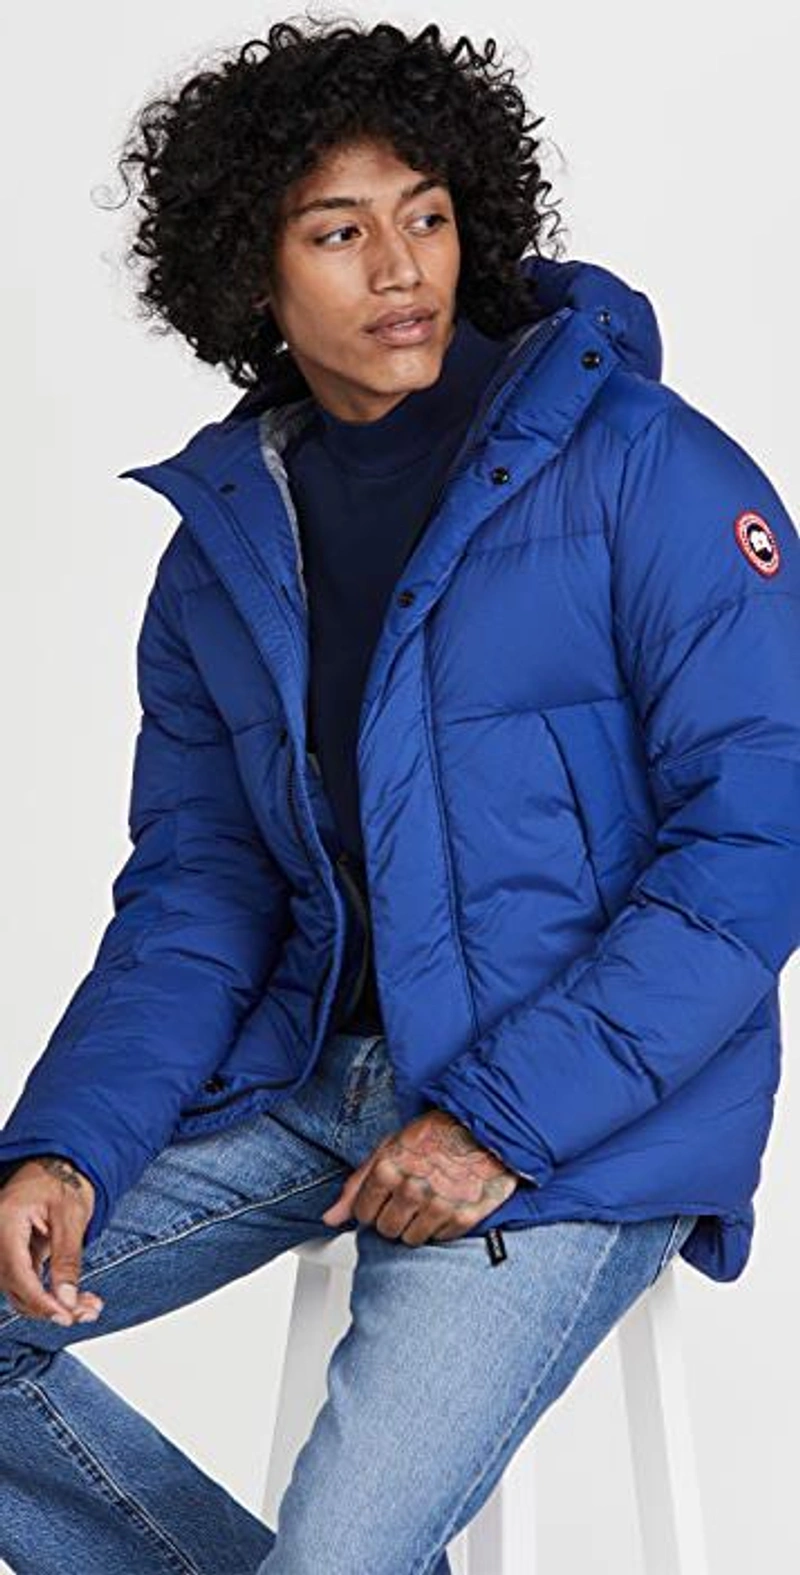 shopbop.com's Posts | 搭配: Canada Goose Armstrong Packable Quilted Nylon-ripstop Hooded Down Jacket In Blue；Rails Lennox Regular Fit Plaid Cotton Blend Button-up Shirt In Cornflower Vermillion；Club Monaco Tea Dye Mock Neck Cotton Sweatshirt In Dark Navy